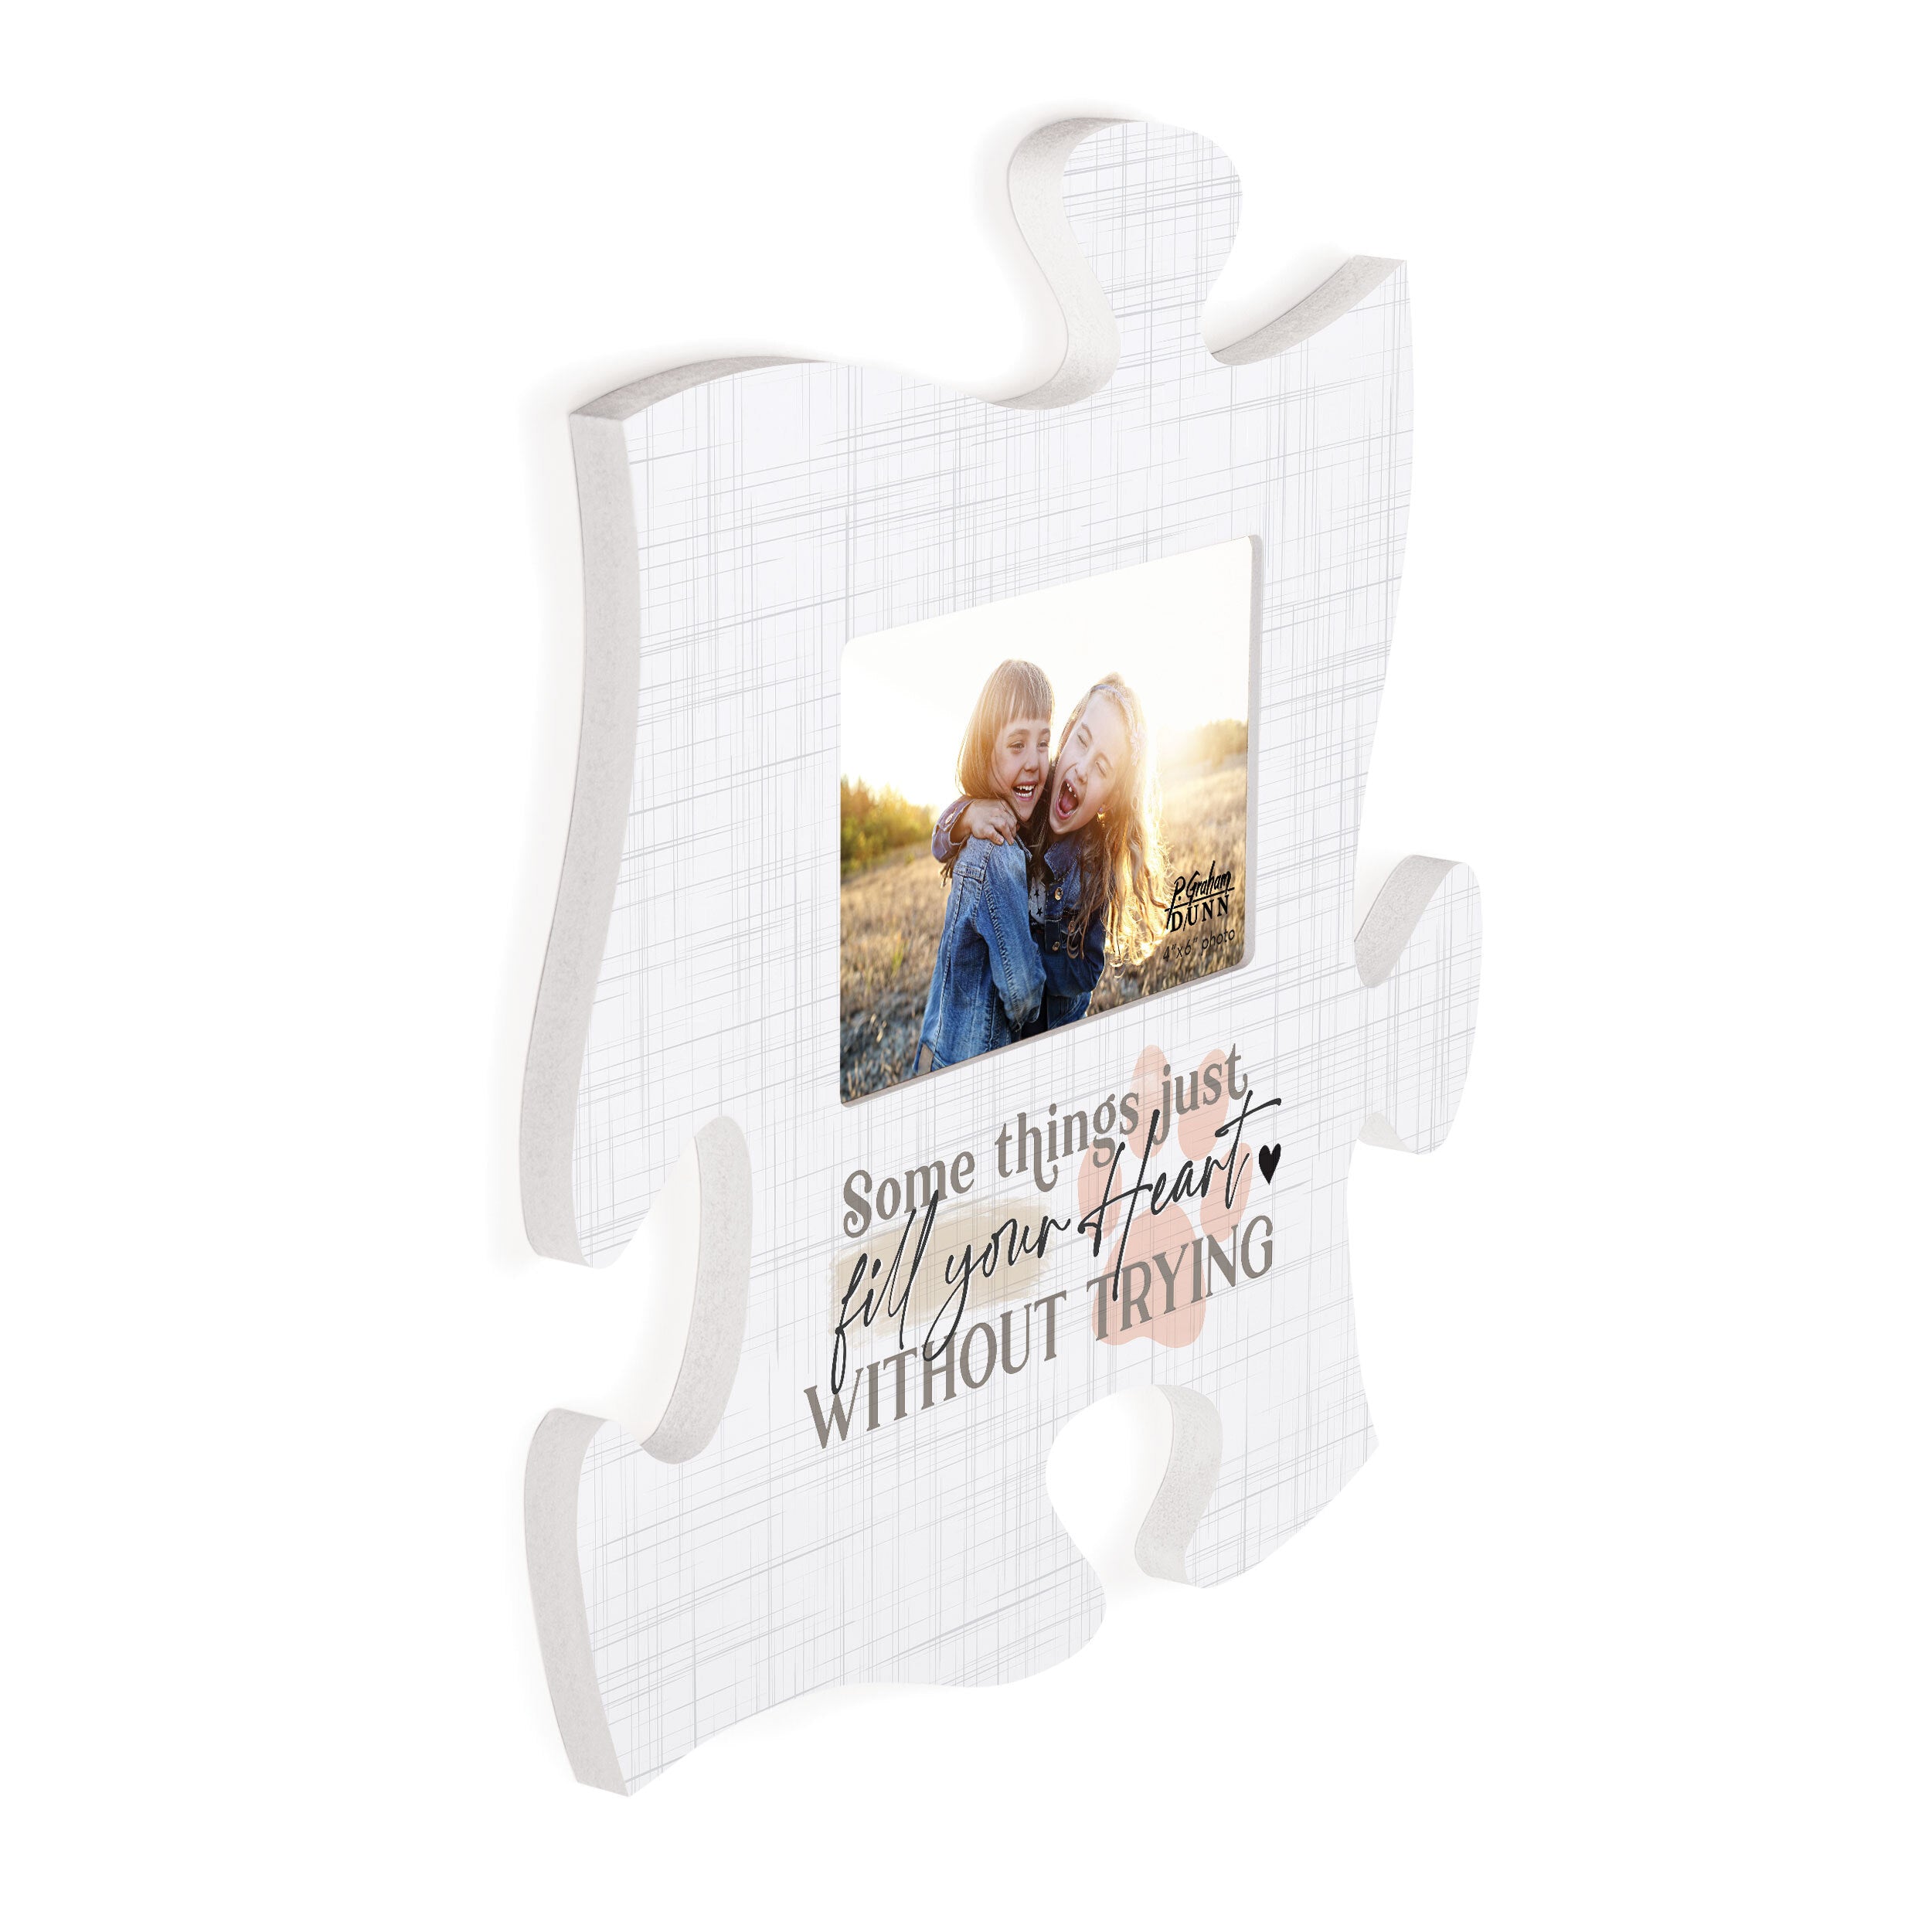 Some Things Just Fill Your Heart Puzzle Piece Photo Frame (4x6 Photo)